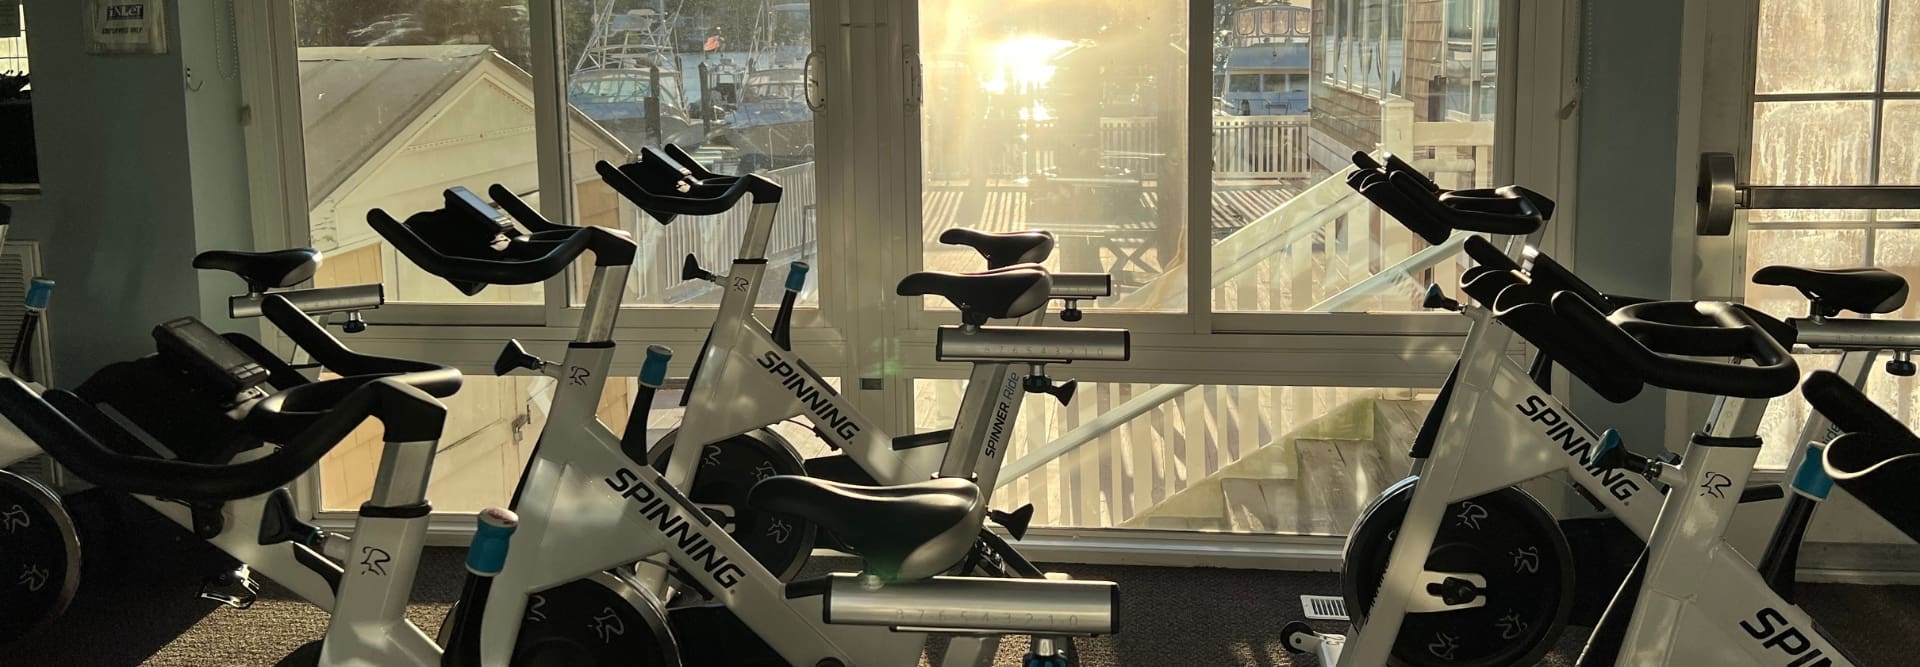 stationary bikes in a row in a spin studio at inlet fitness in virginia beach